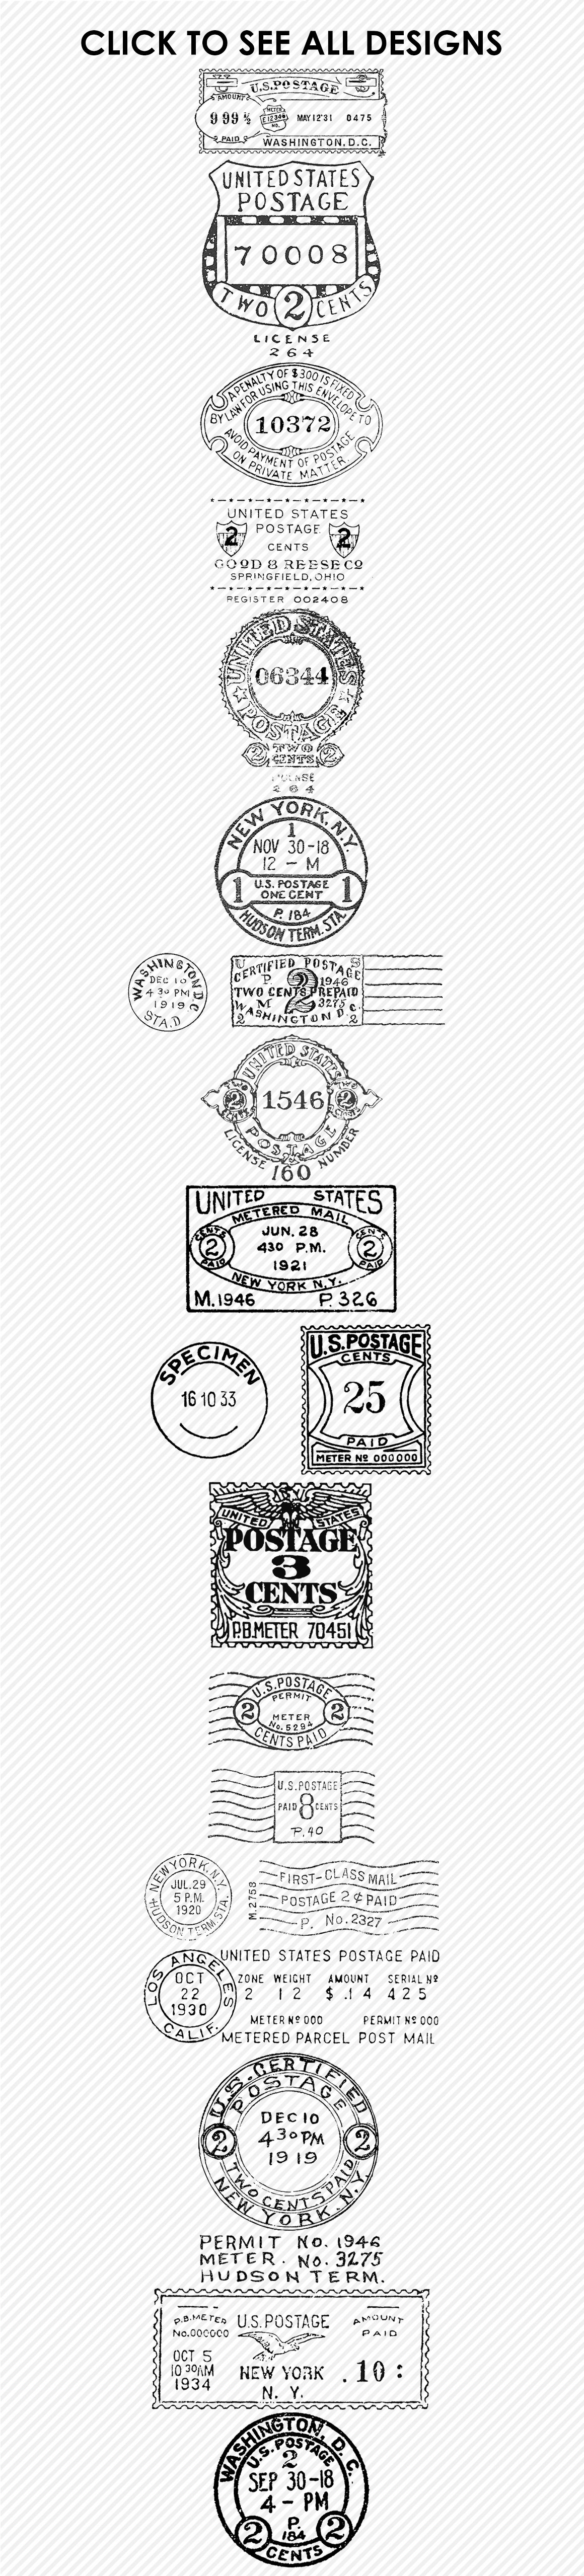 Postal Photoshop Brushes & Stampspreview image.